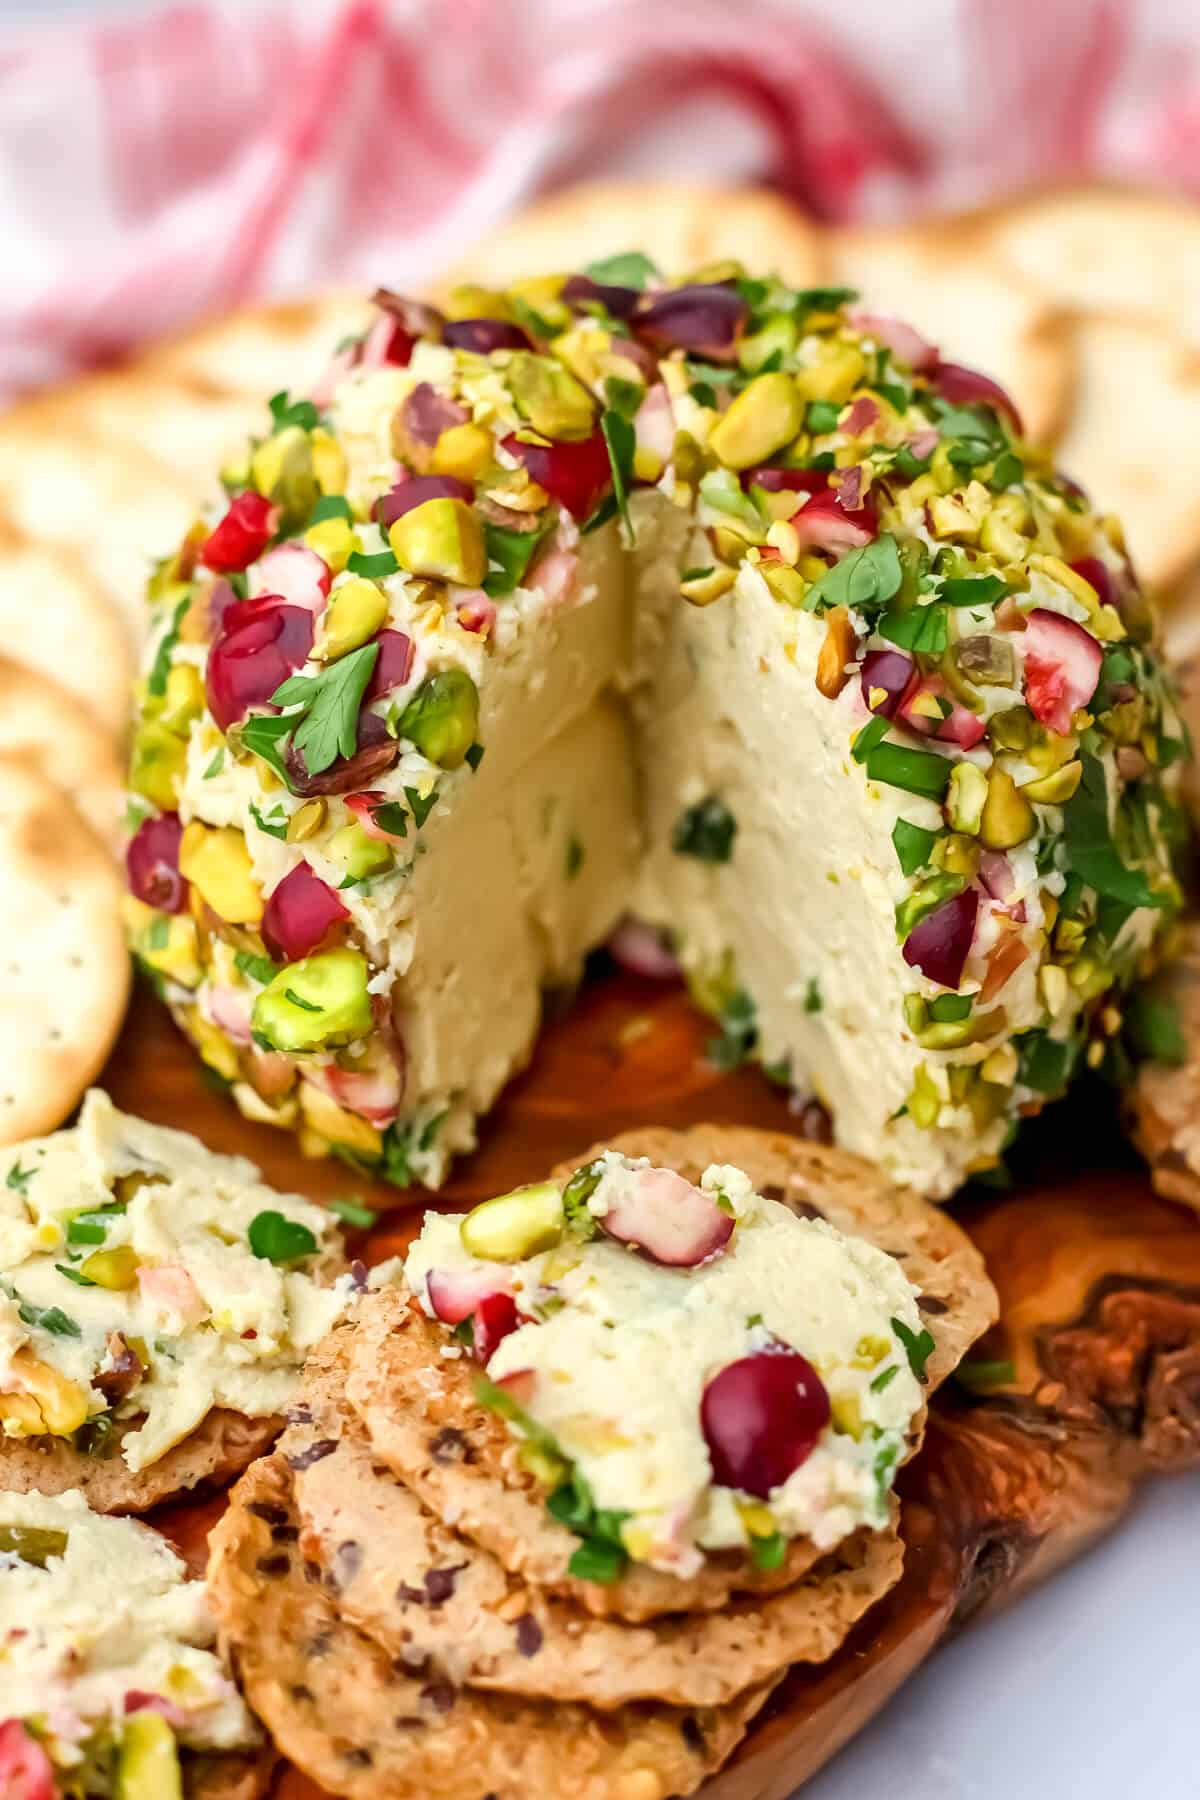 A vegan cheese ball on a cutting board with a slice taken out of it and spread on a cracker.